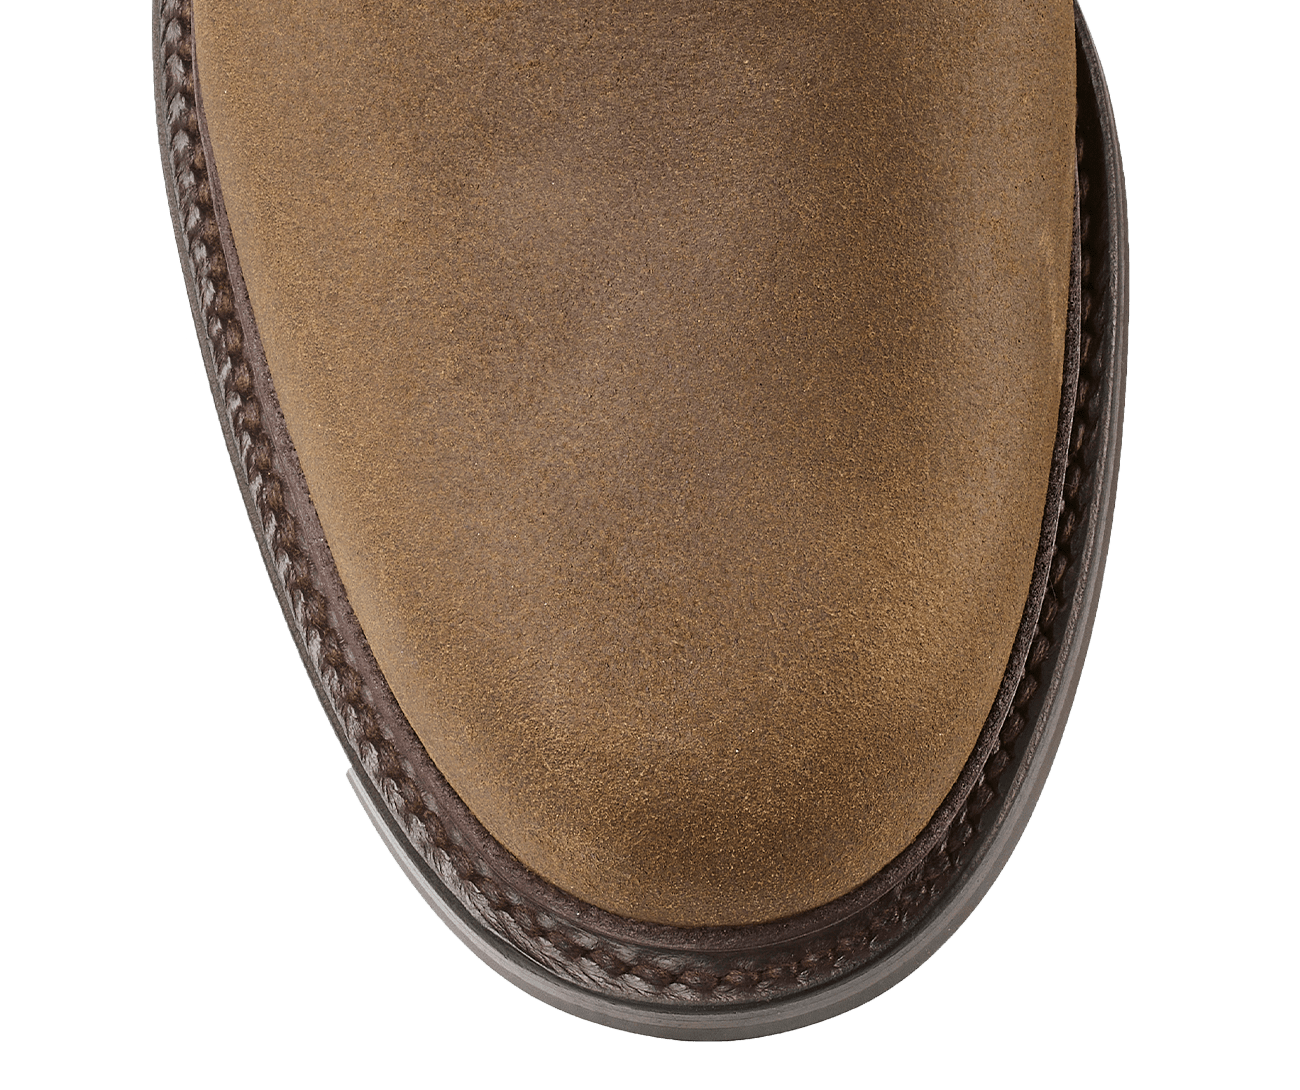 Kelso Natural Rough-Out Suede